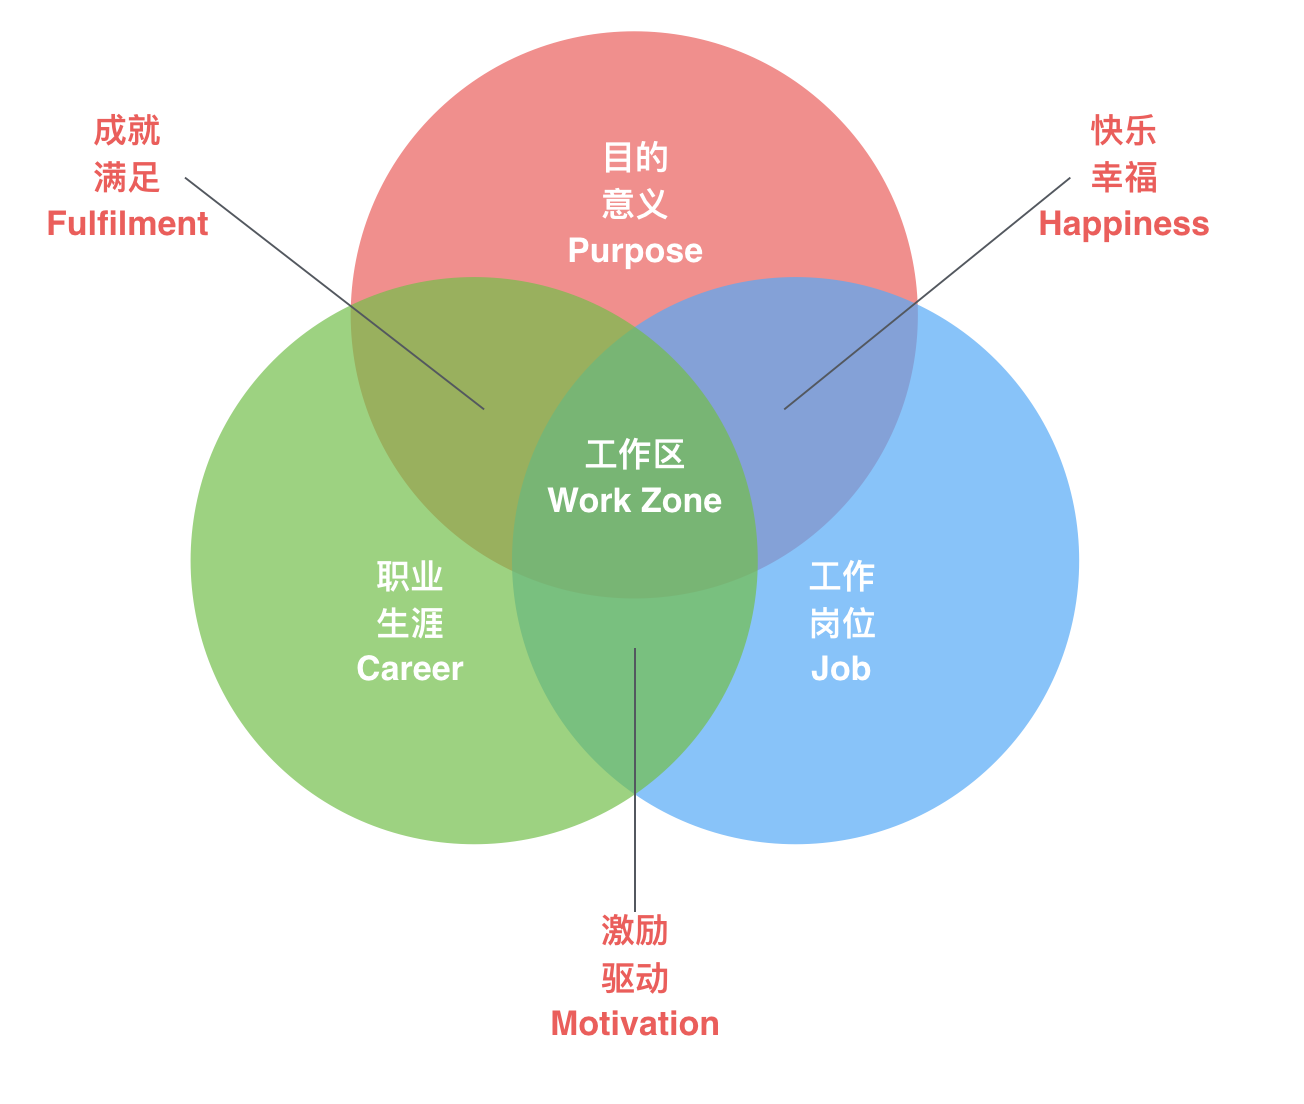 https://img.zhaoweiguo.com/knowledge/images/jikes/jinjies/work-zone1.png